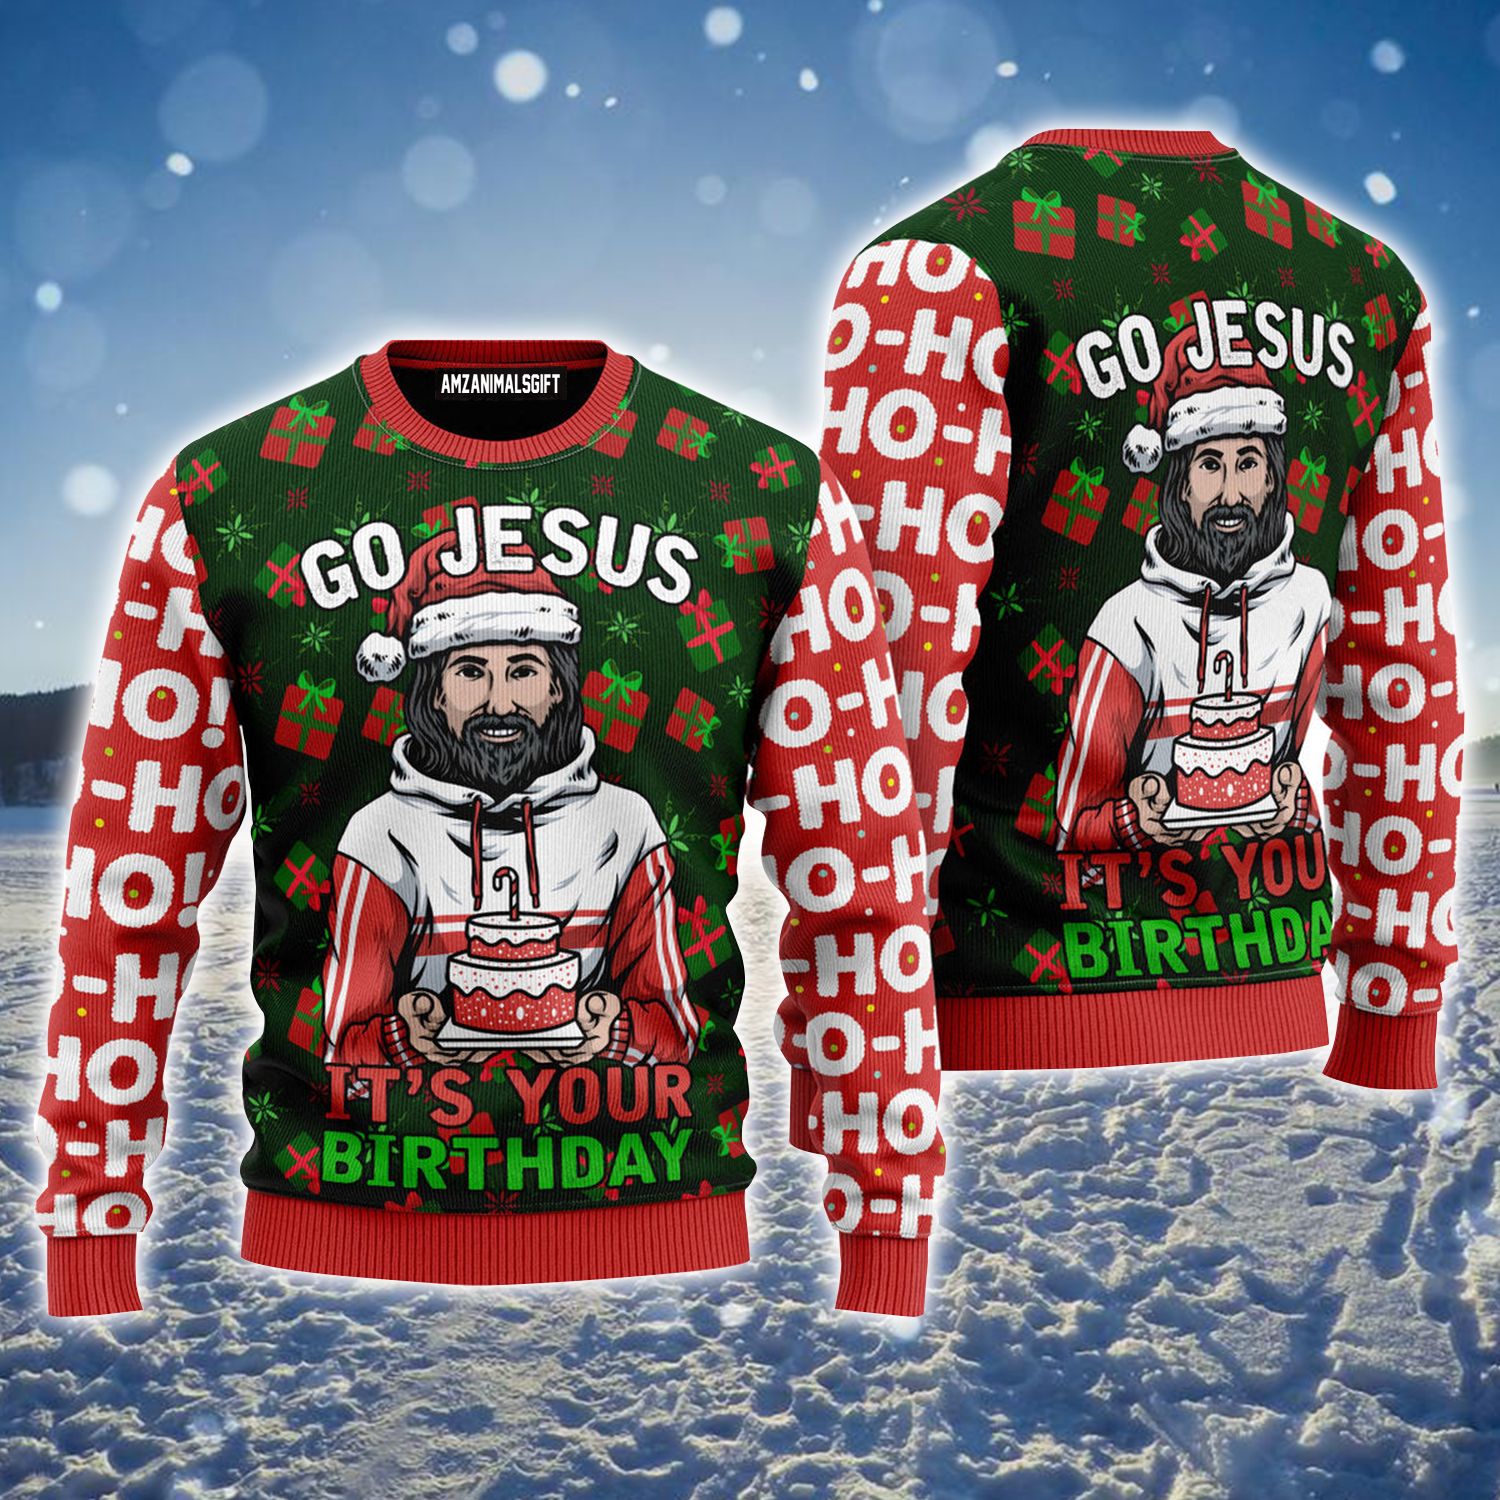 Jesus Ugly Sweater, Go Jesus It's Your Birthday Ugly Sweater, Christmas Hohoho Funny Sweater For Men & Women, Perfect Gift For Christian, Friends, Family